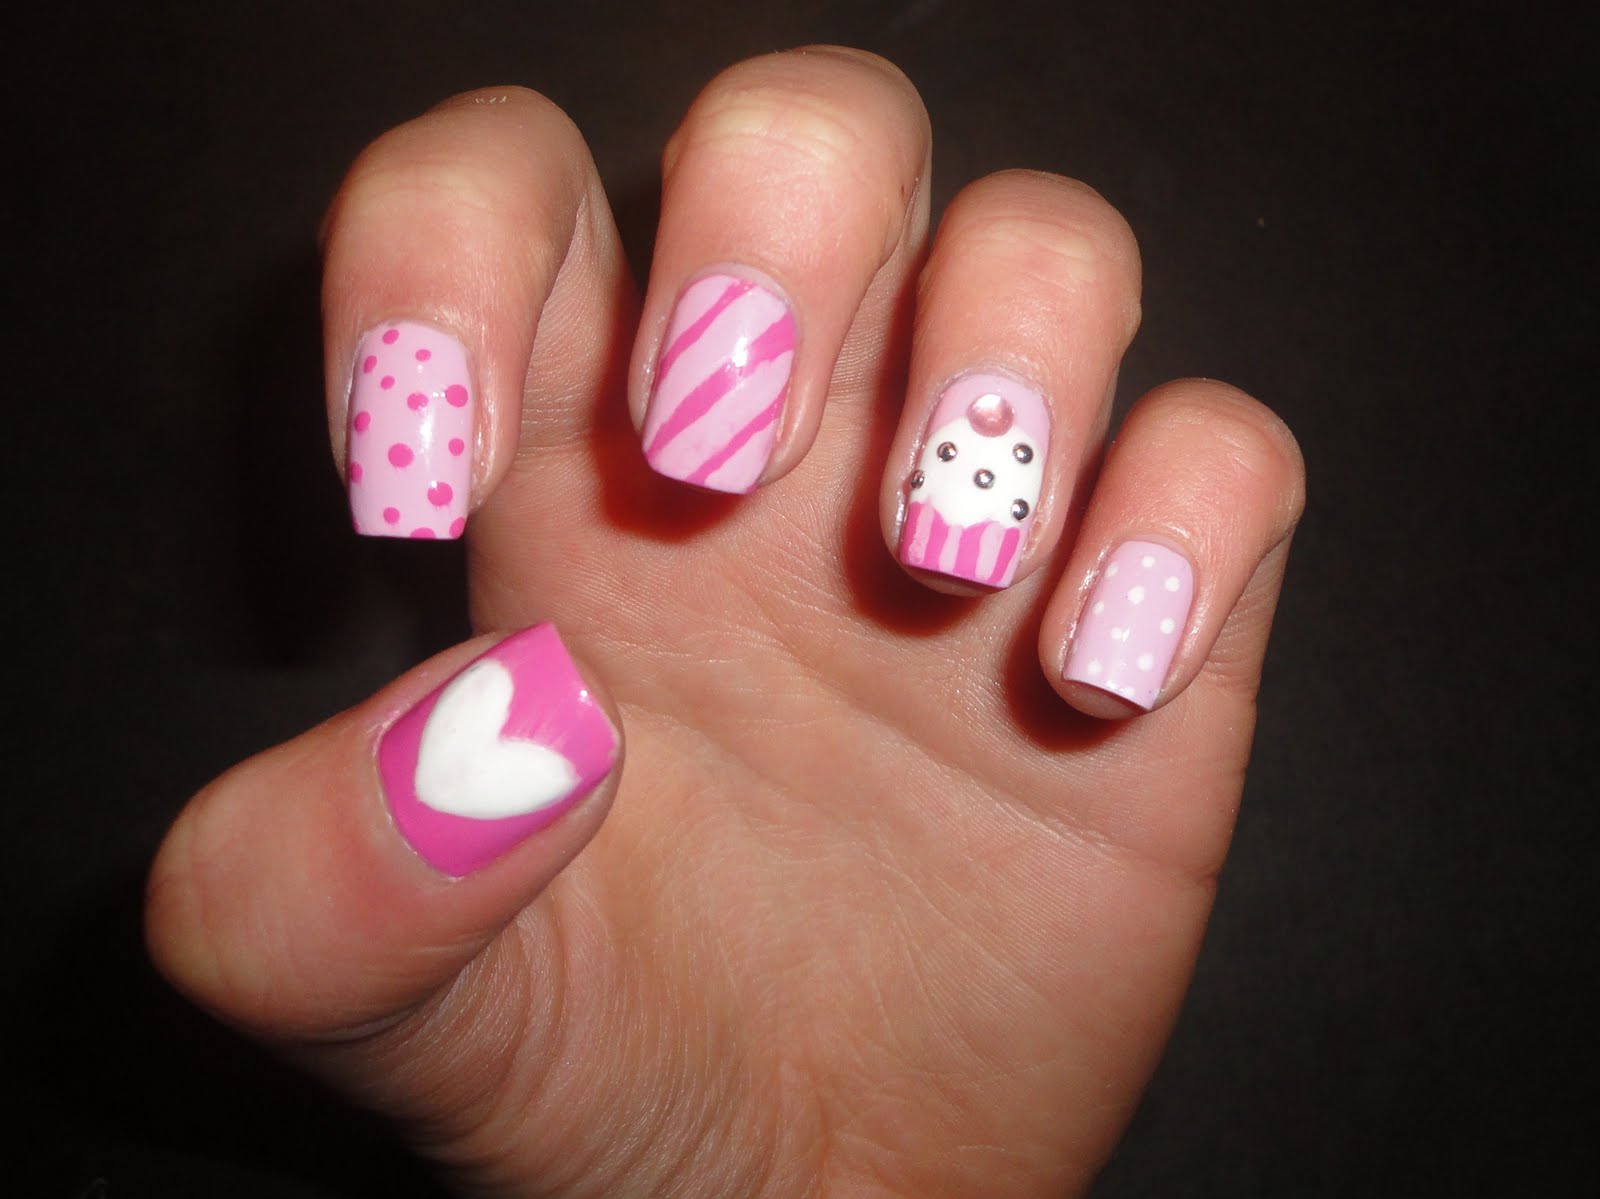 4. Cute Nail Designs for Summer - wide 6